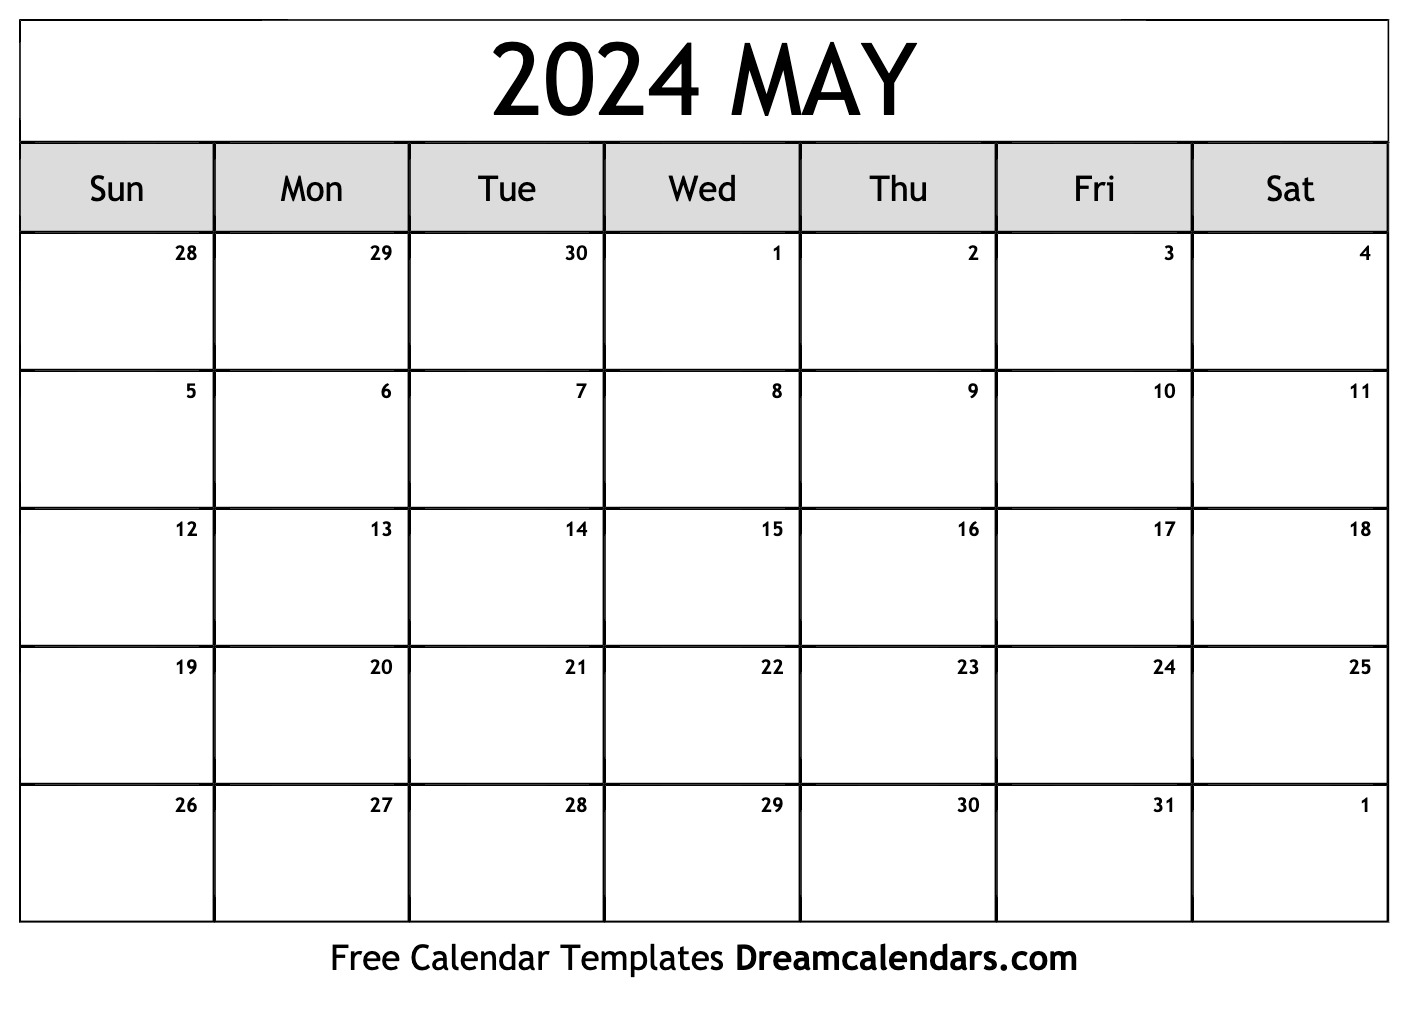 May 2024 Calendar - Free Printable with Holidays and Observances